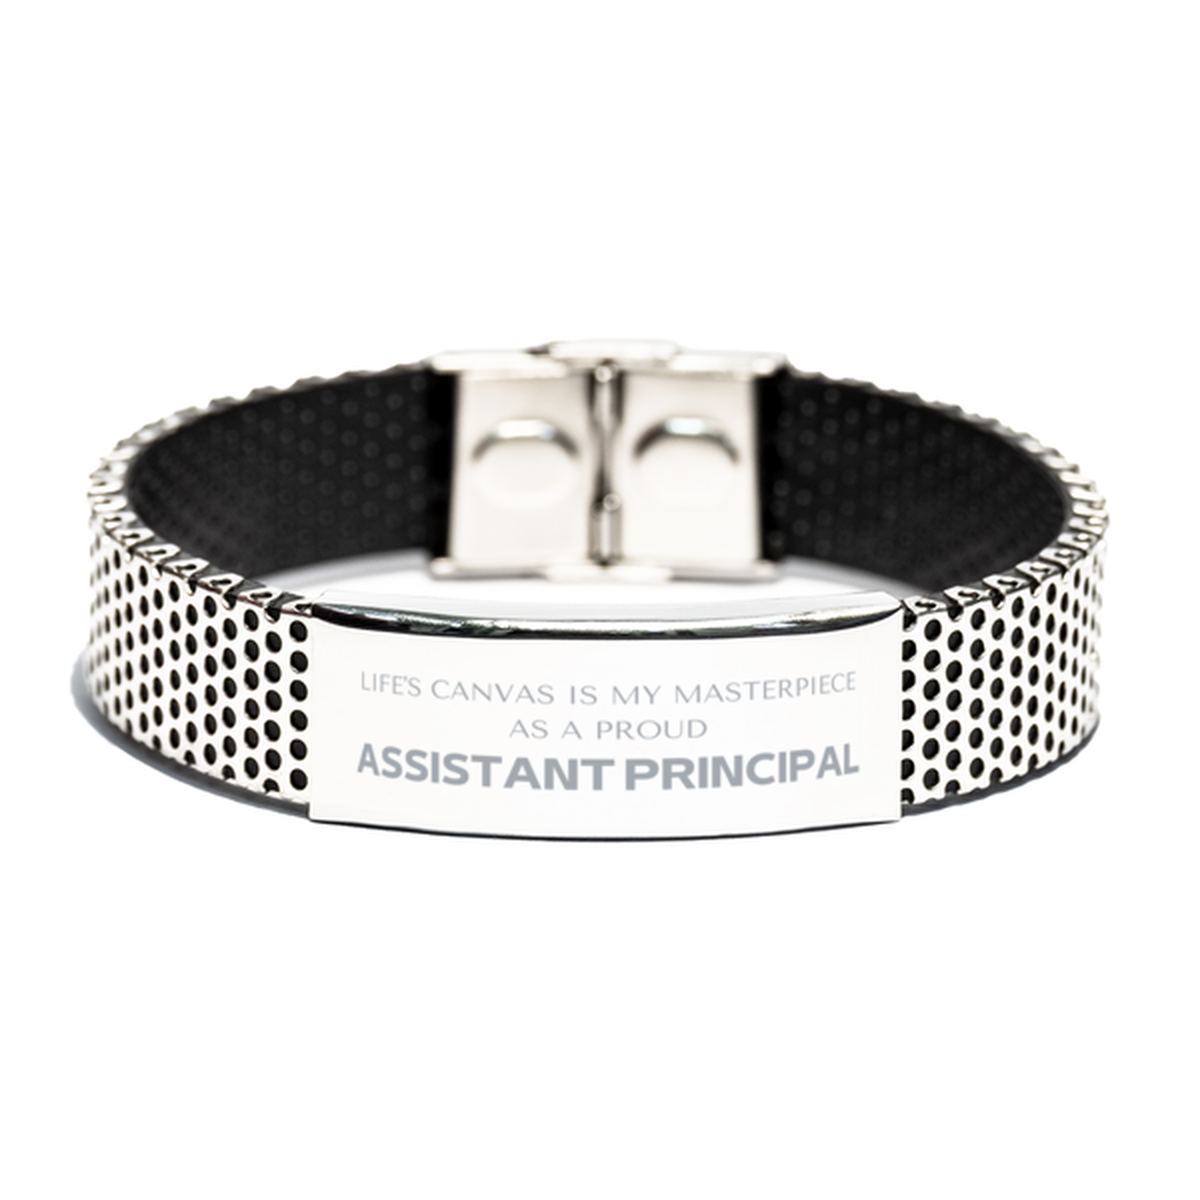 Proud Assistant Principal Gifts, Life's canvas is my masterpiece, Epic Birthday Christmas Unique Stainless Steel Bracelet For Assistant Principal, Coworkers, Men, Women, Friends